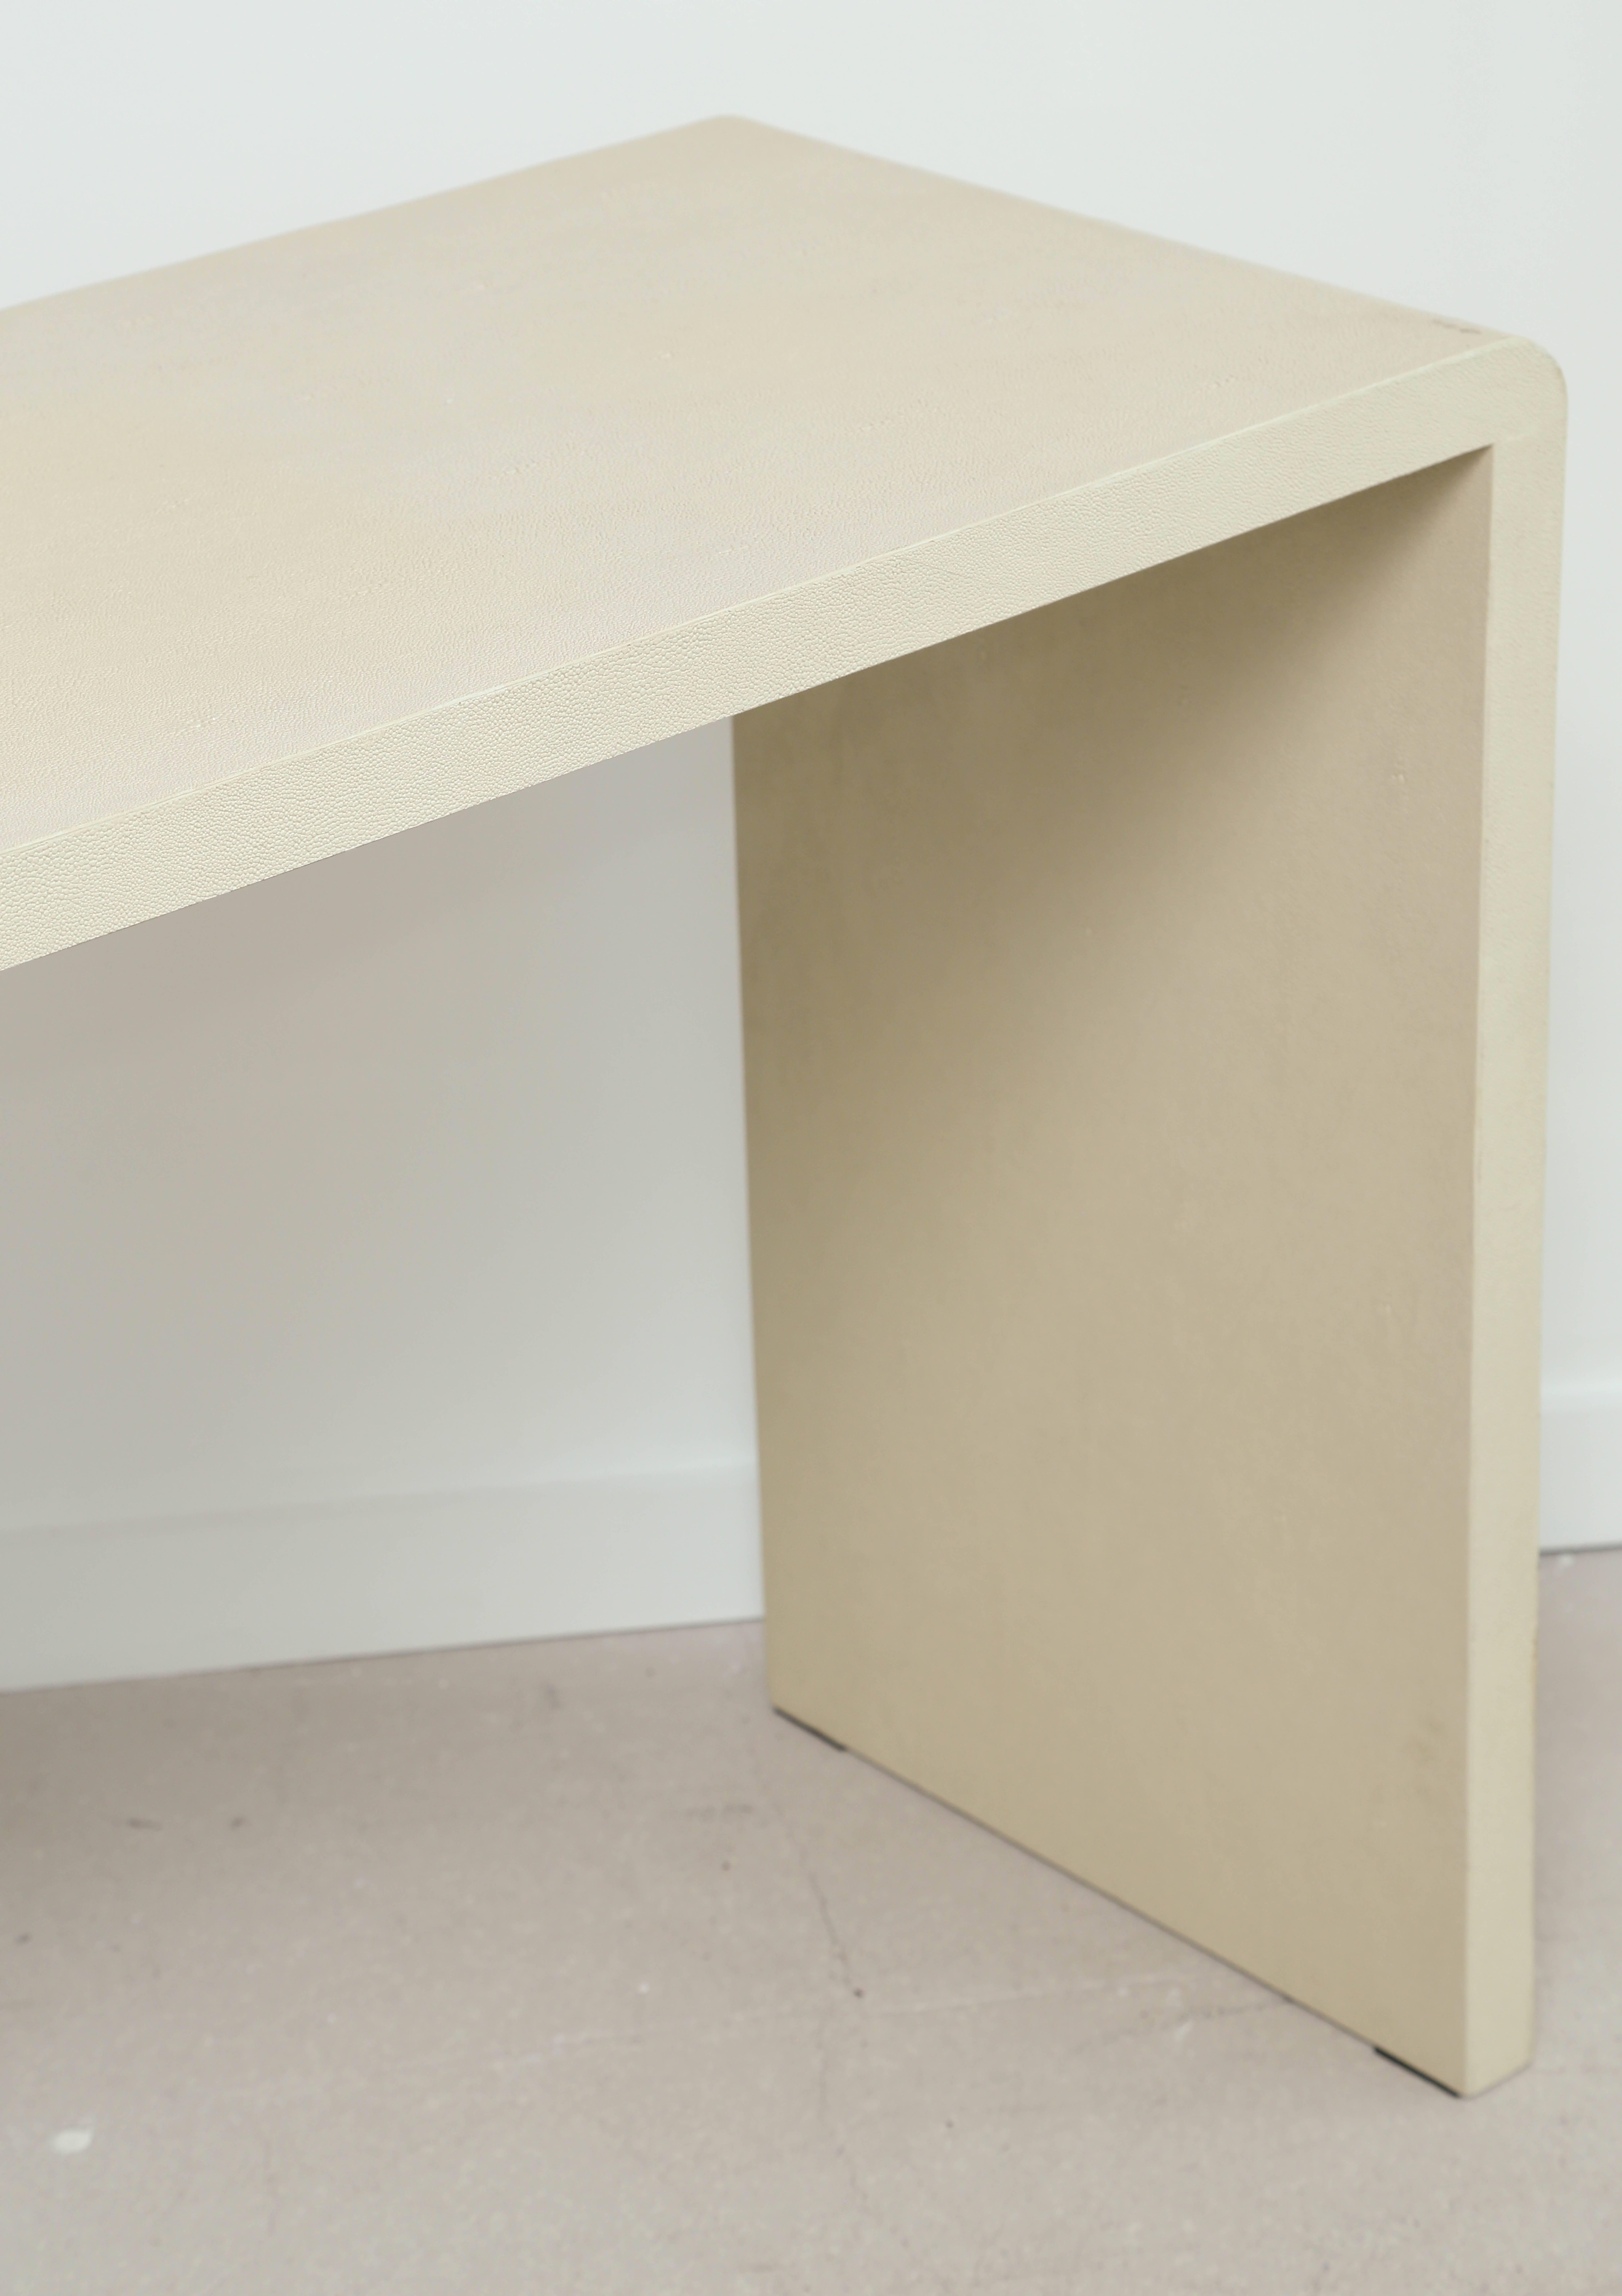 Shagreen console table in a light off-white shade. Simple and linear in shape in the style of Samuel Marx.